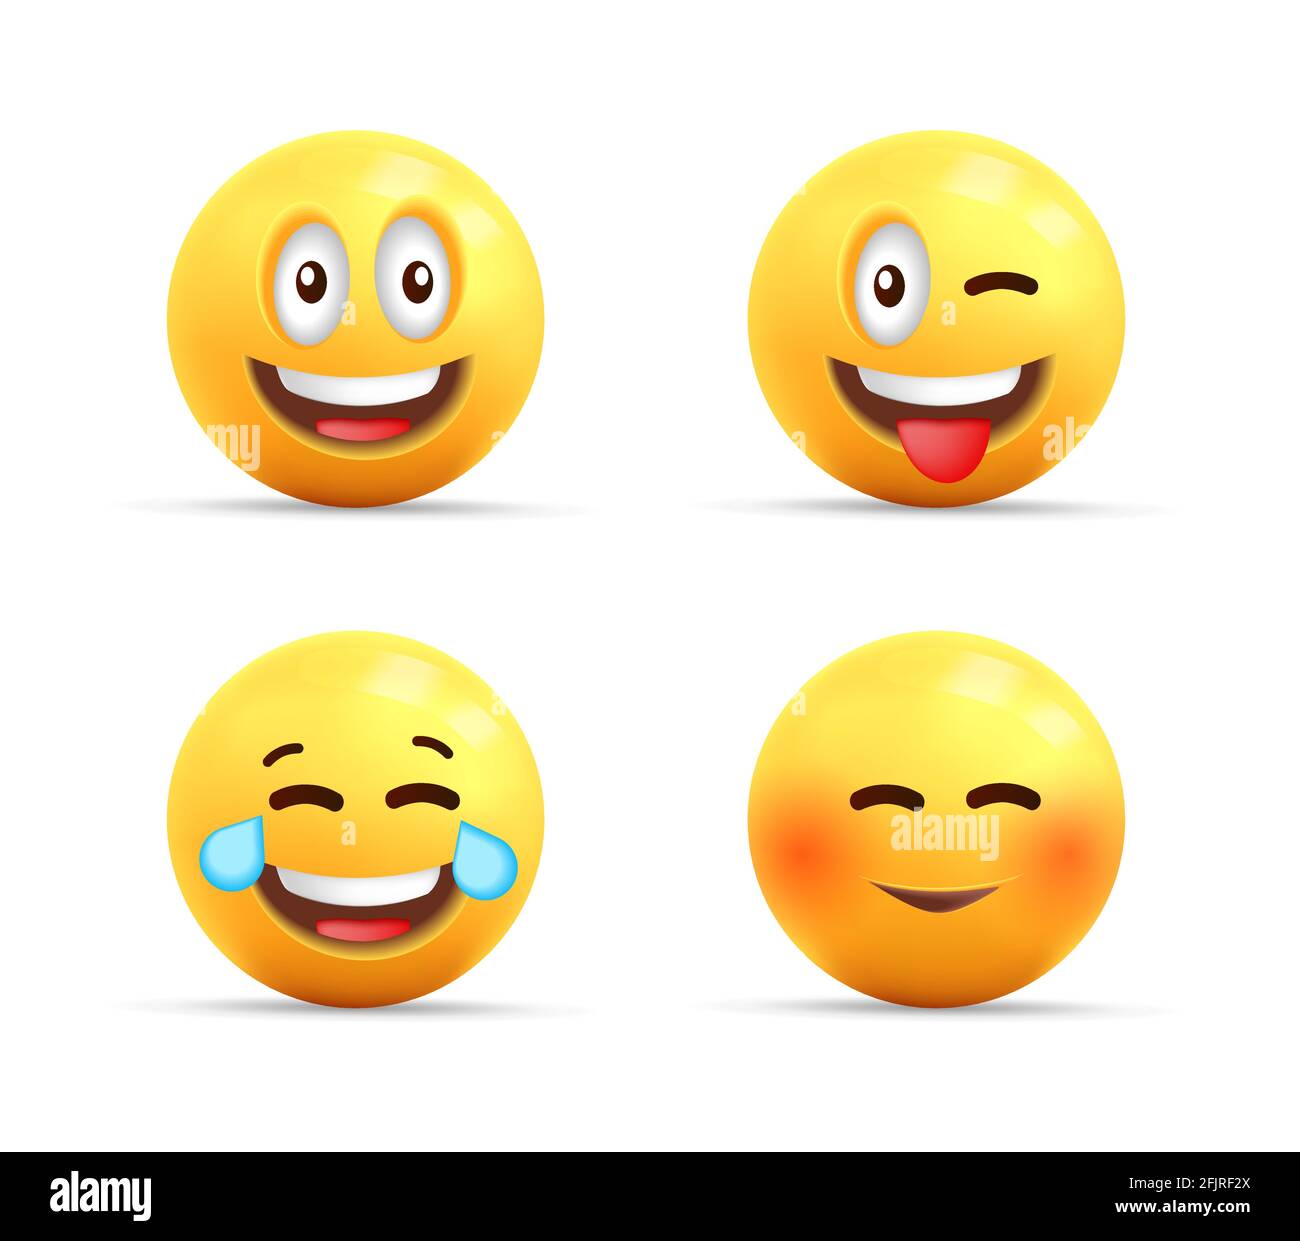 Smiley face 3d icons or yellow symbols with happy expressions, spheric characters laughing, shy and with tongue set Stock Vector